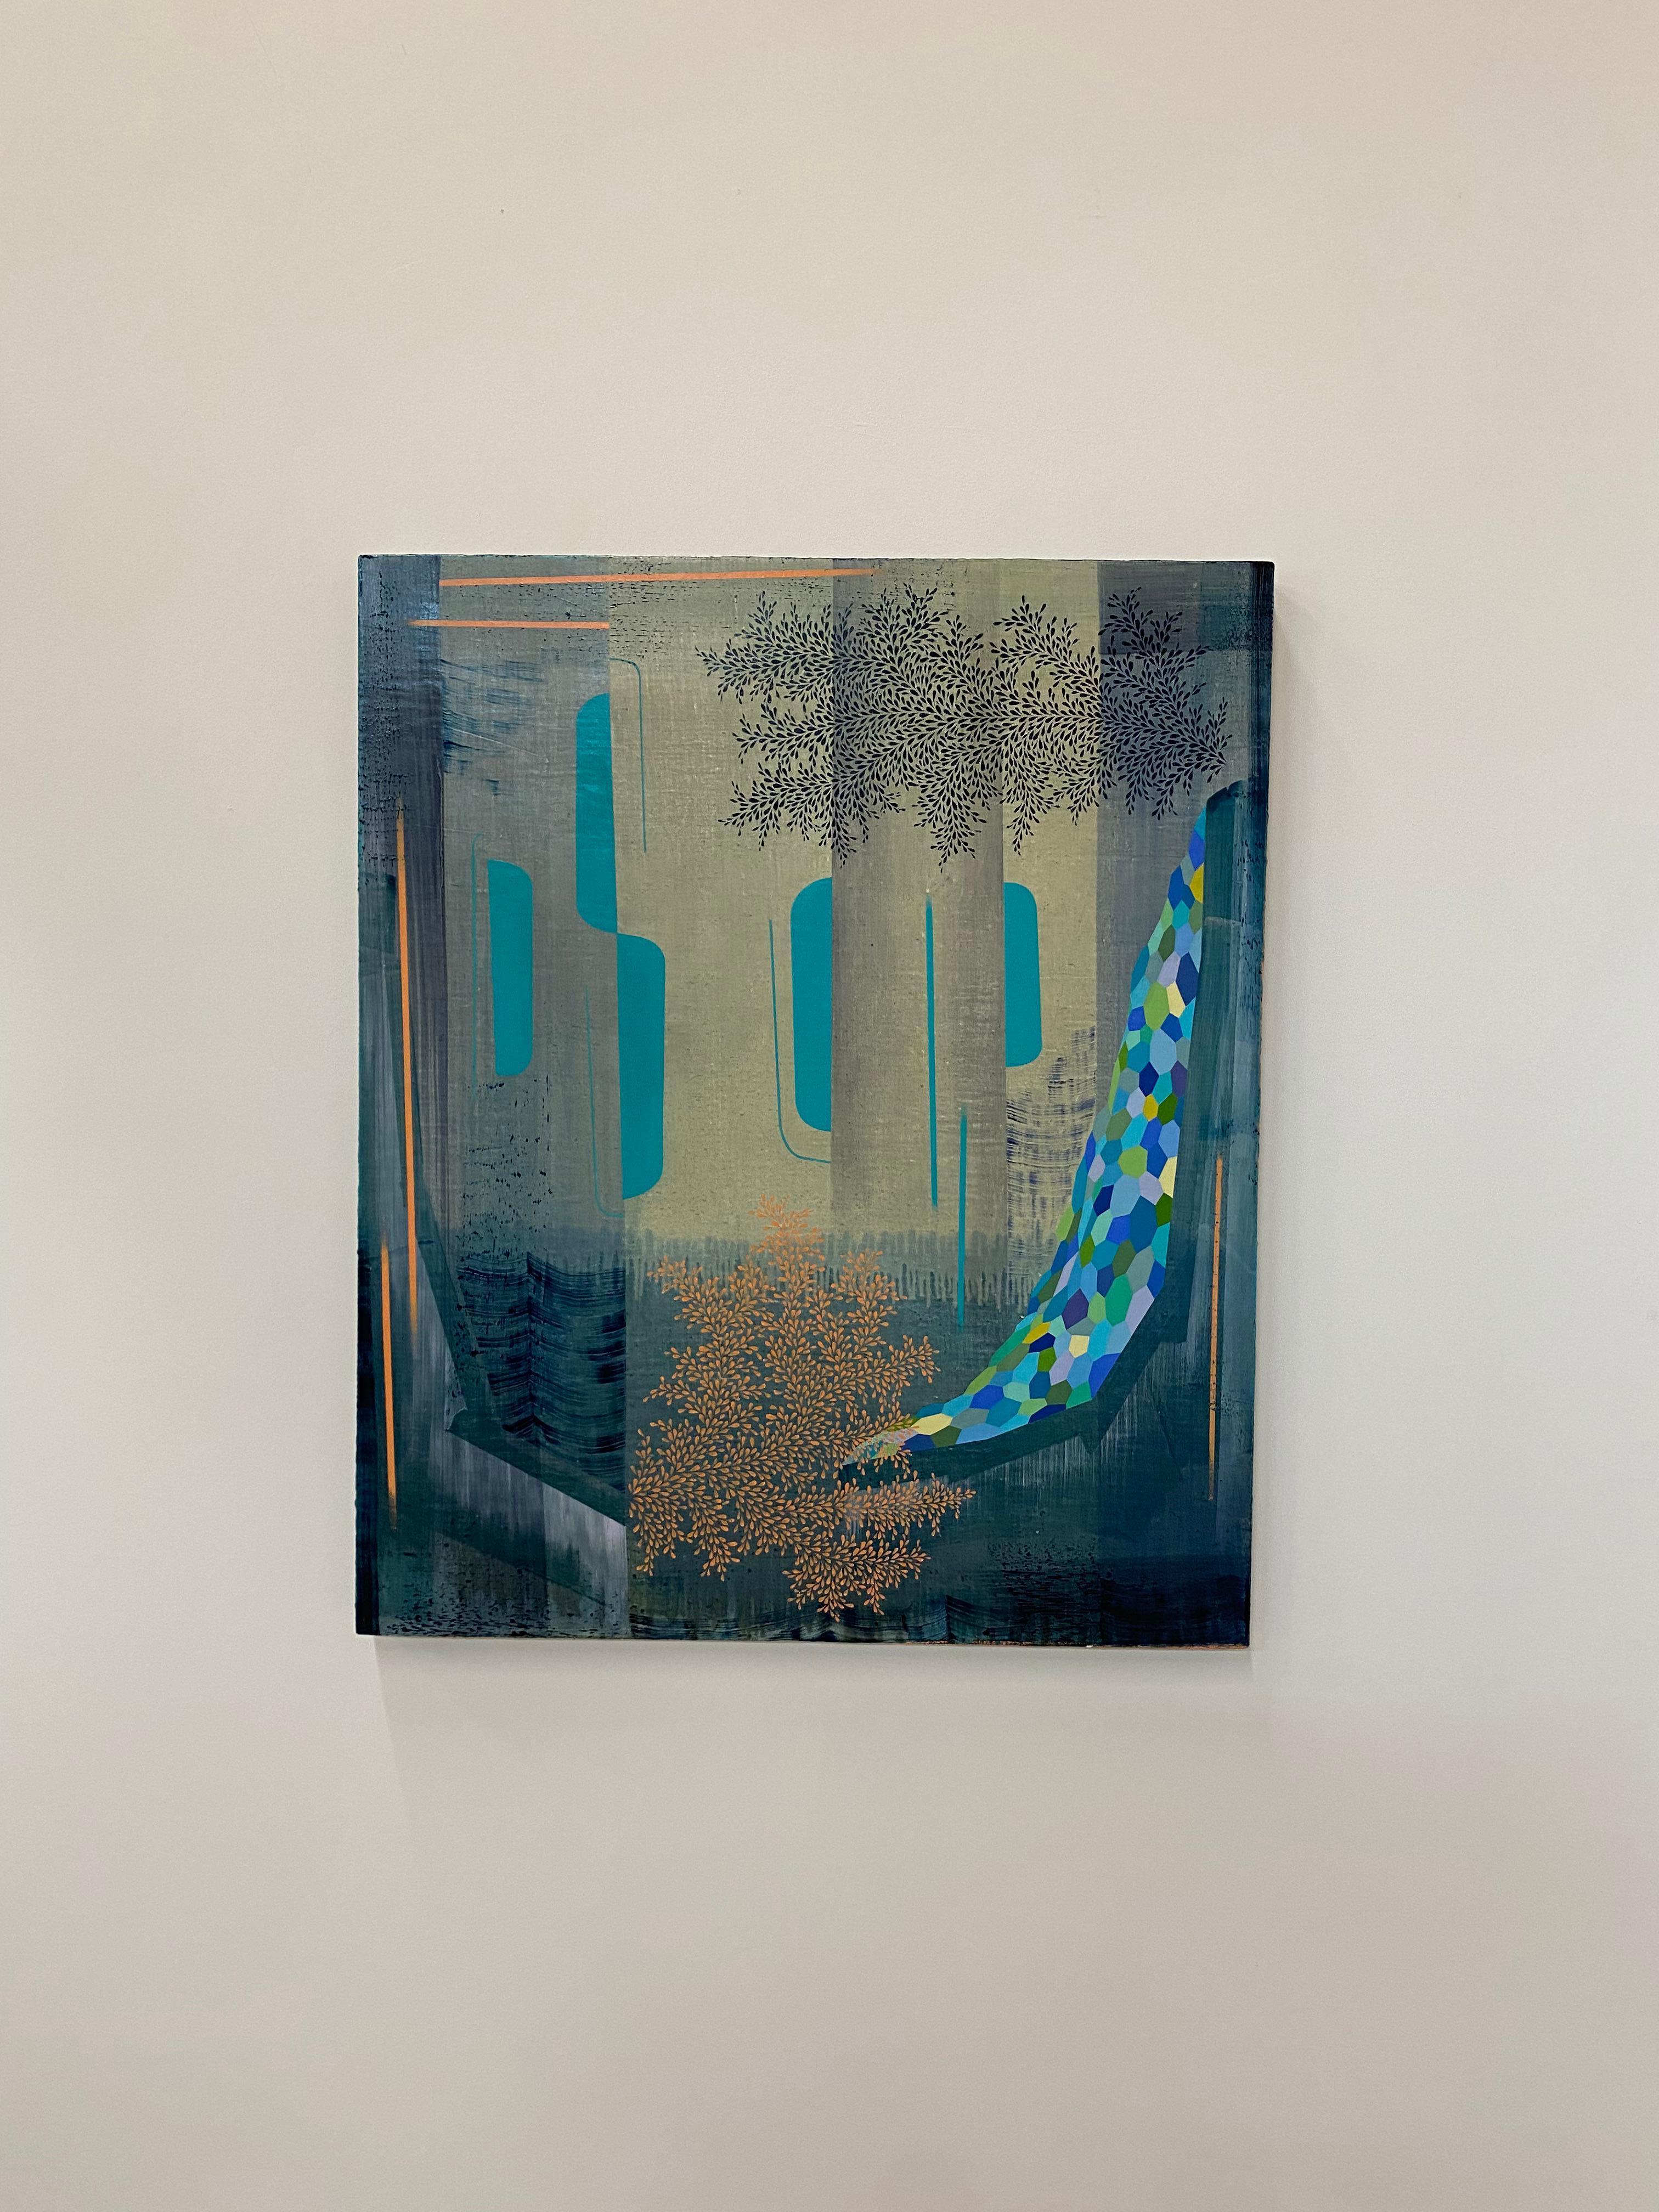 Sister Midnight, Indigo Blue, Teal Green, Peach Abstract Pattern Landscape - Contemporary Painting by Gabe Brown